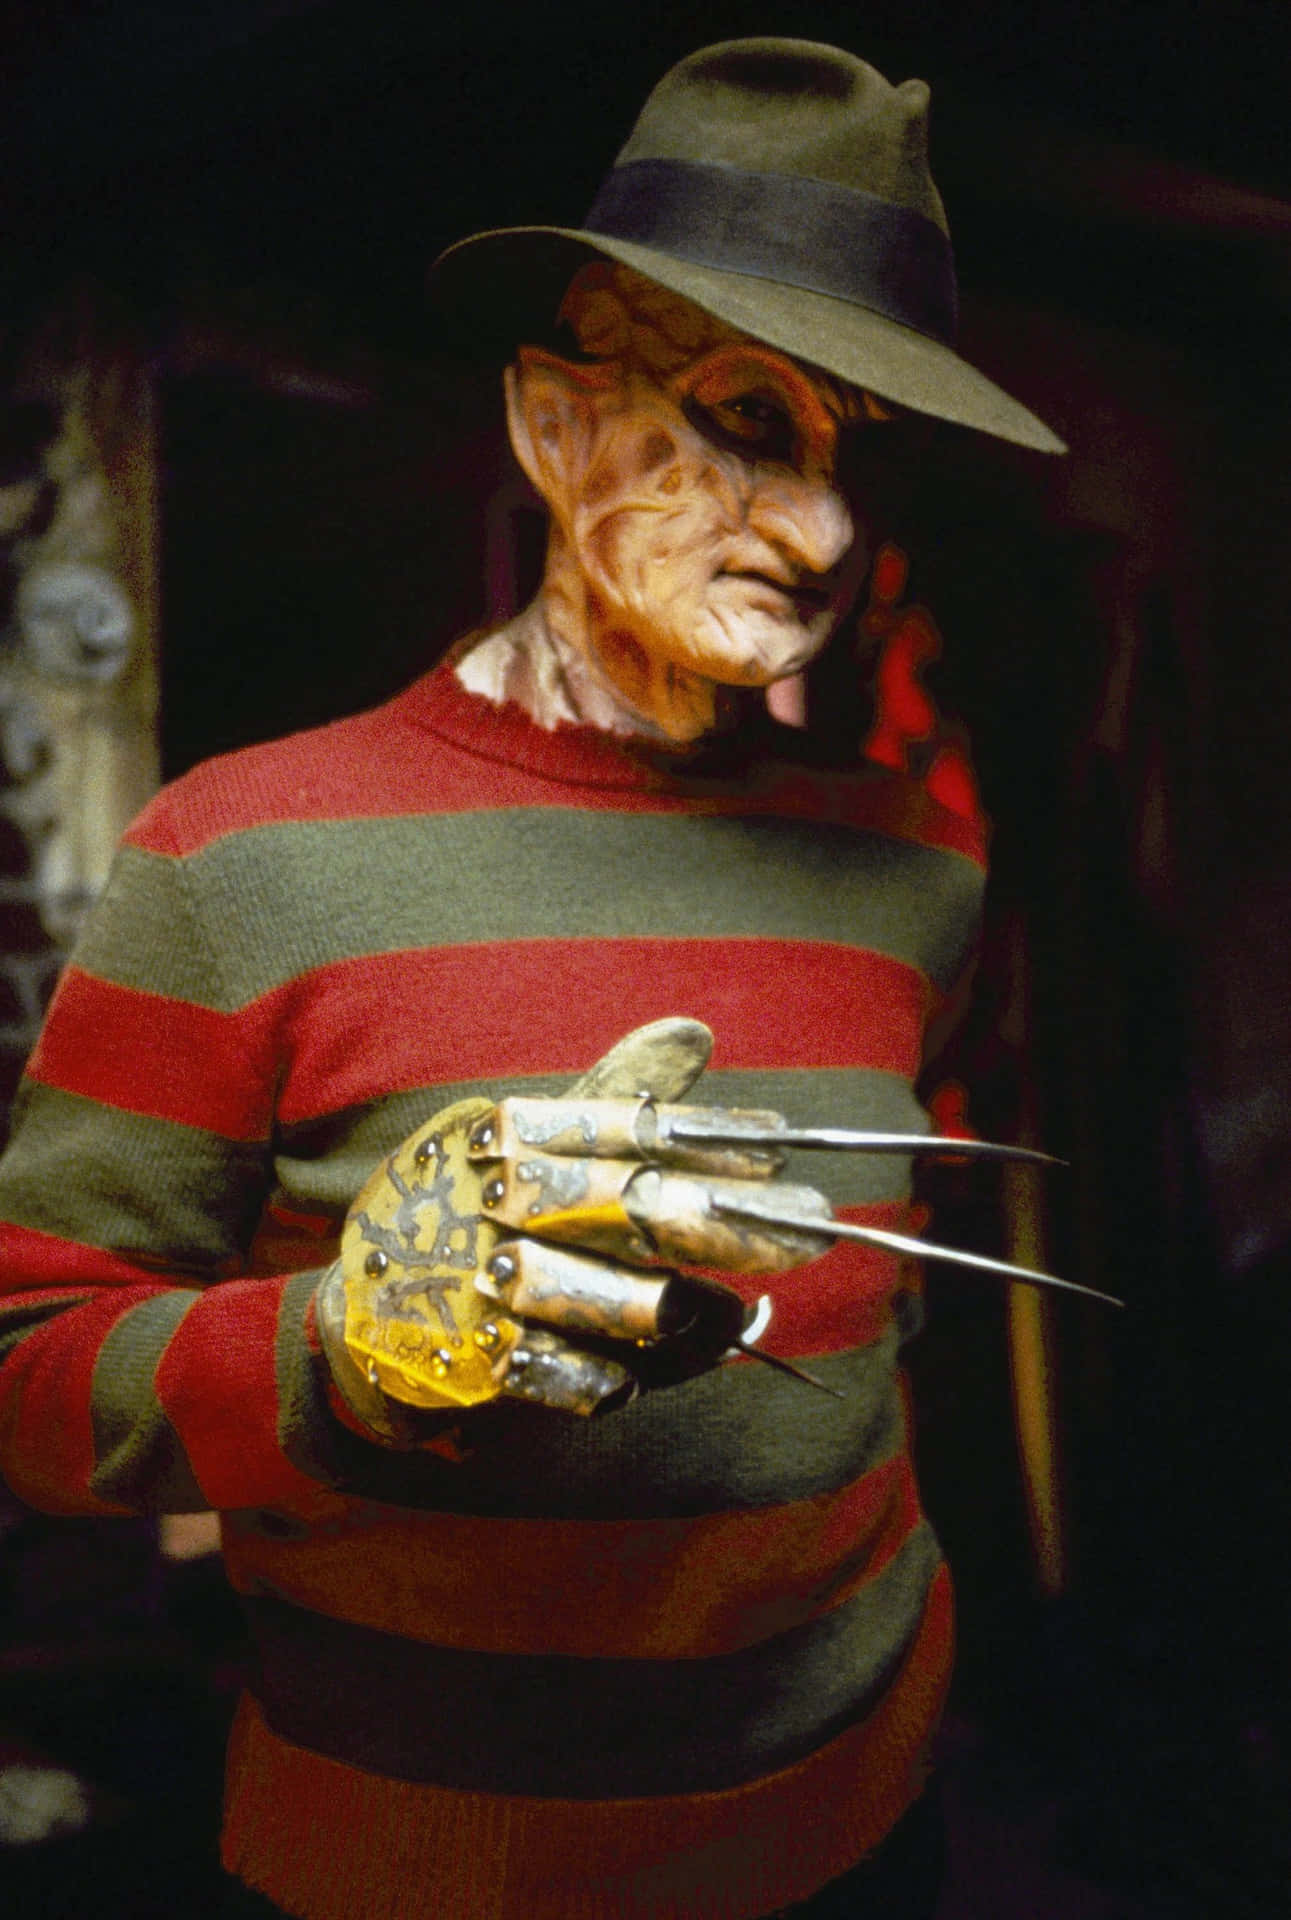 Freddy Krueger In A Hat And Sweater Holding A Knife